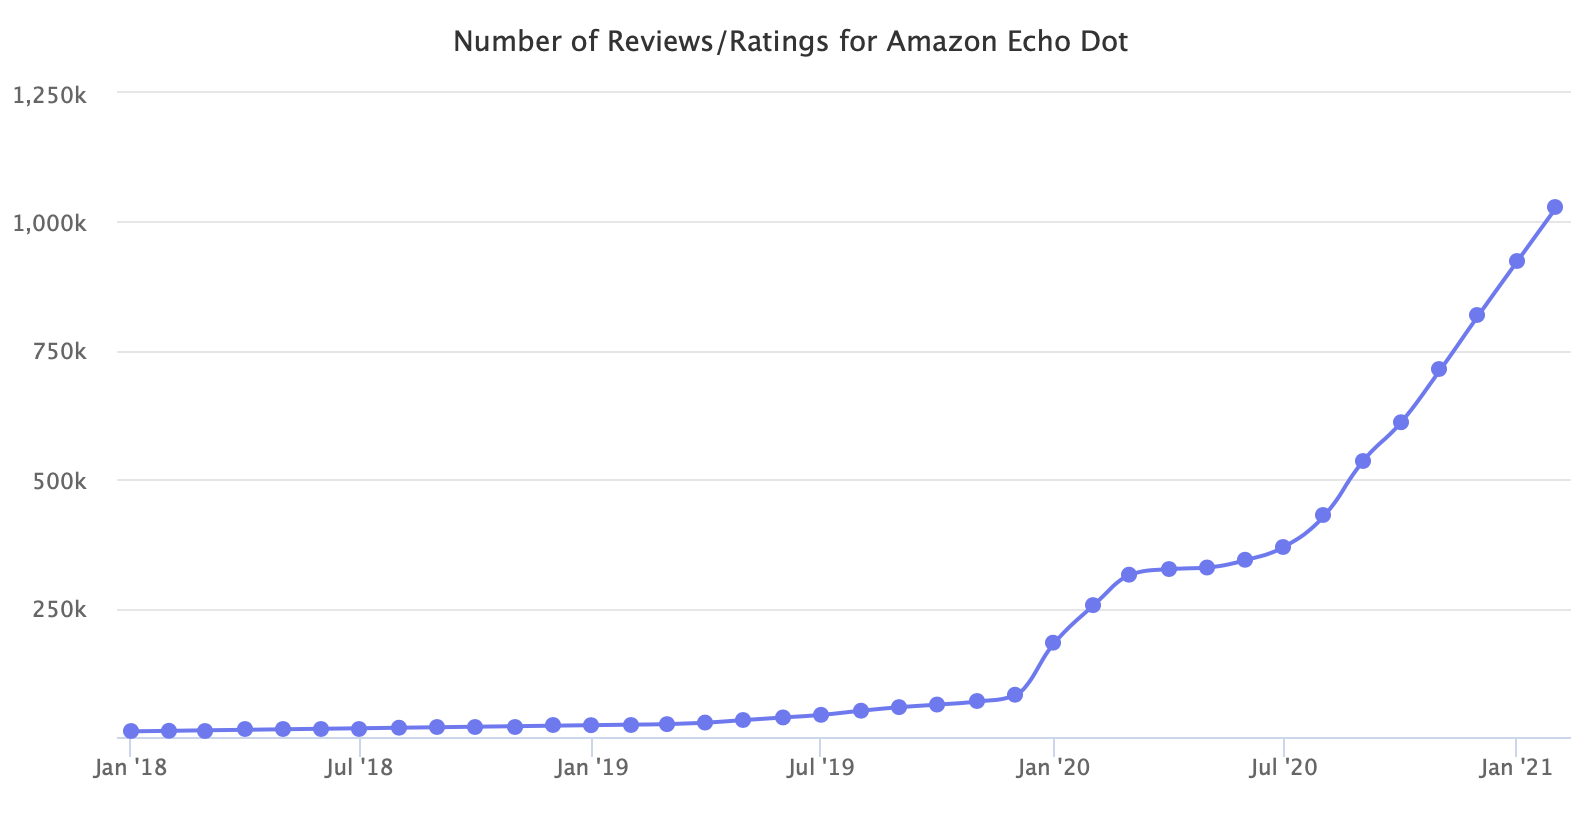 Number of Reviews/Ratings for Amazon Echo Dot